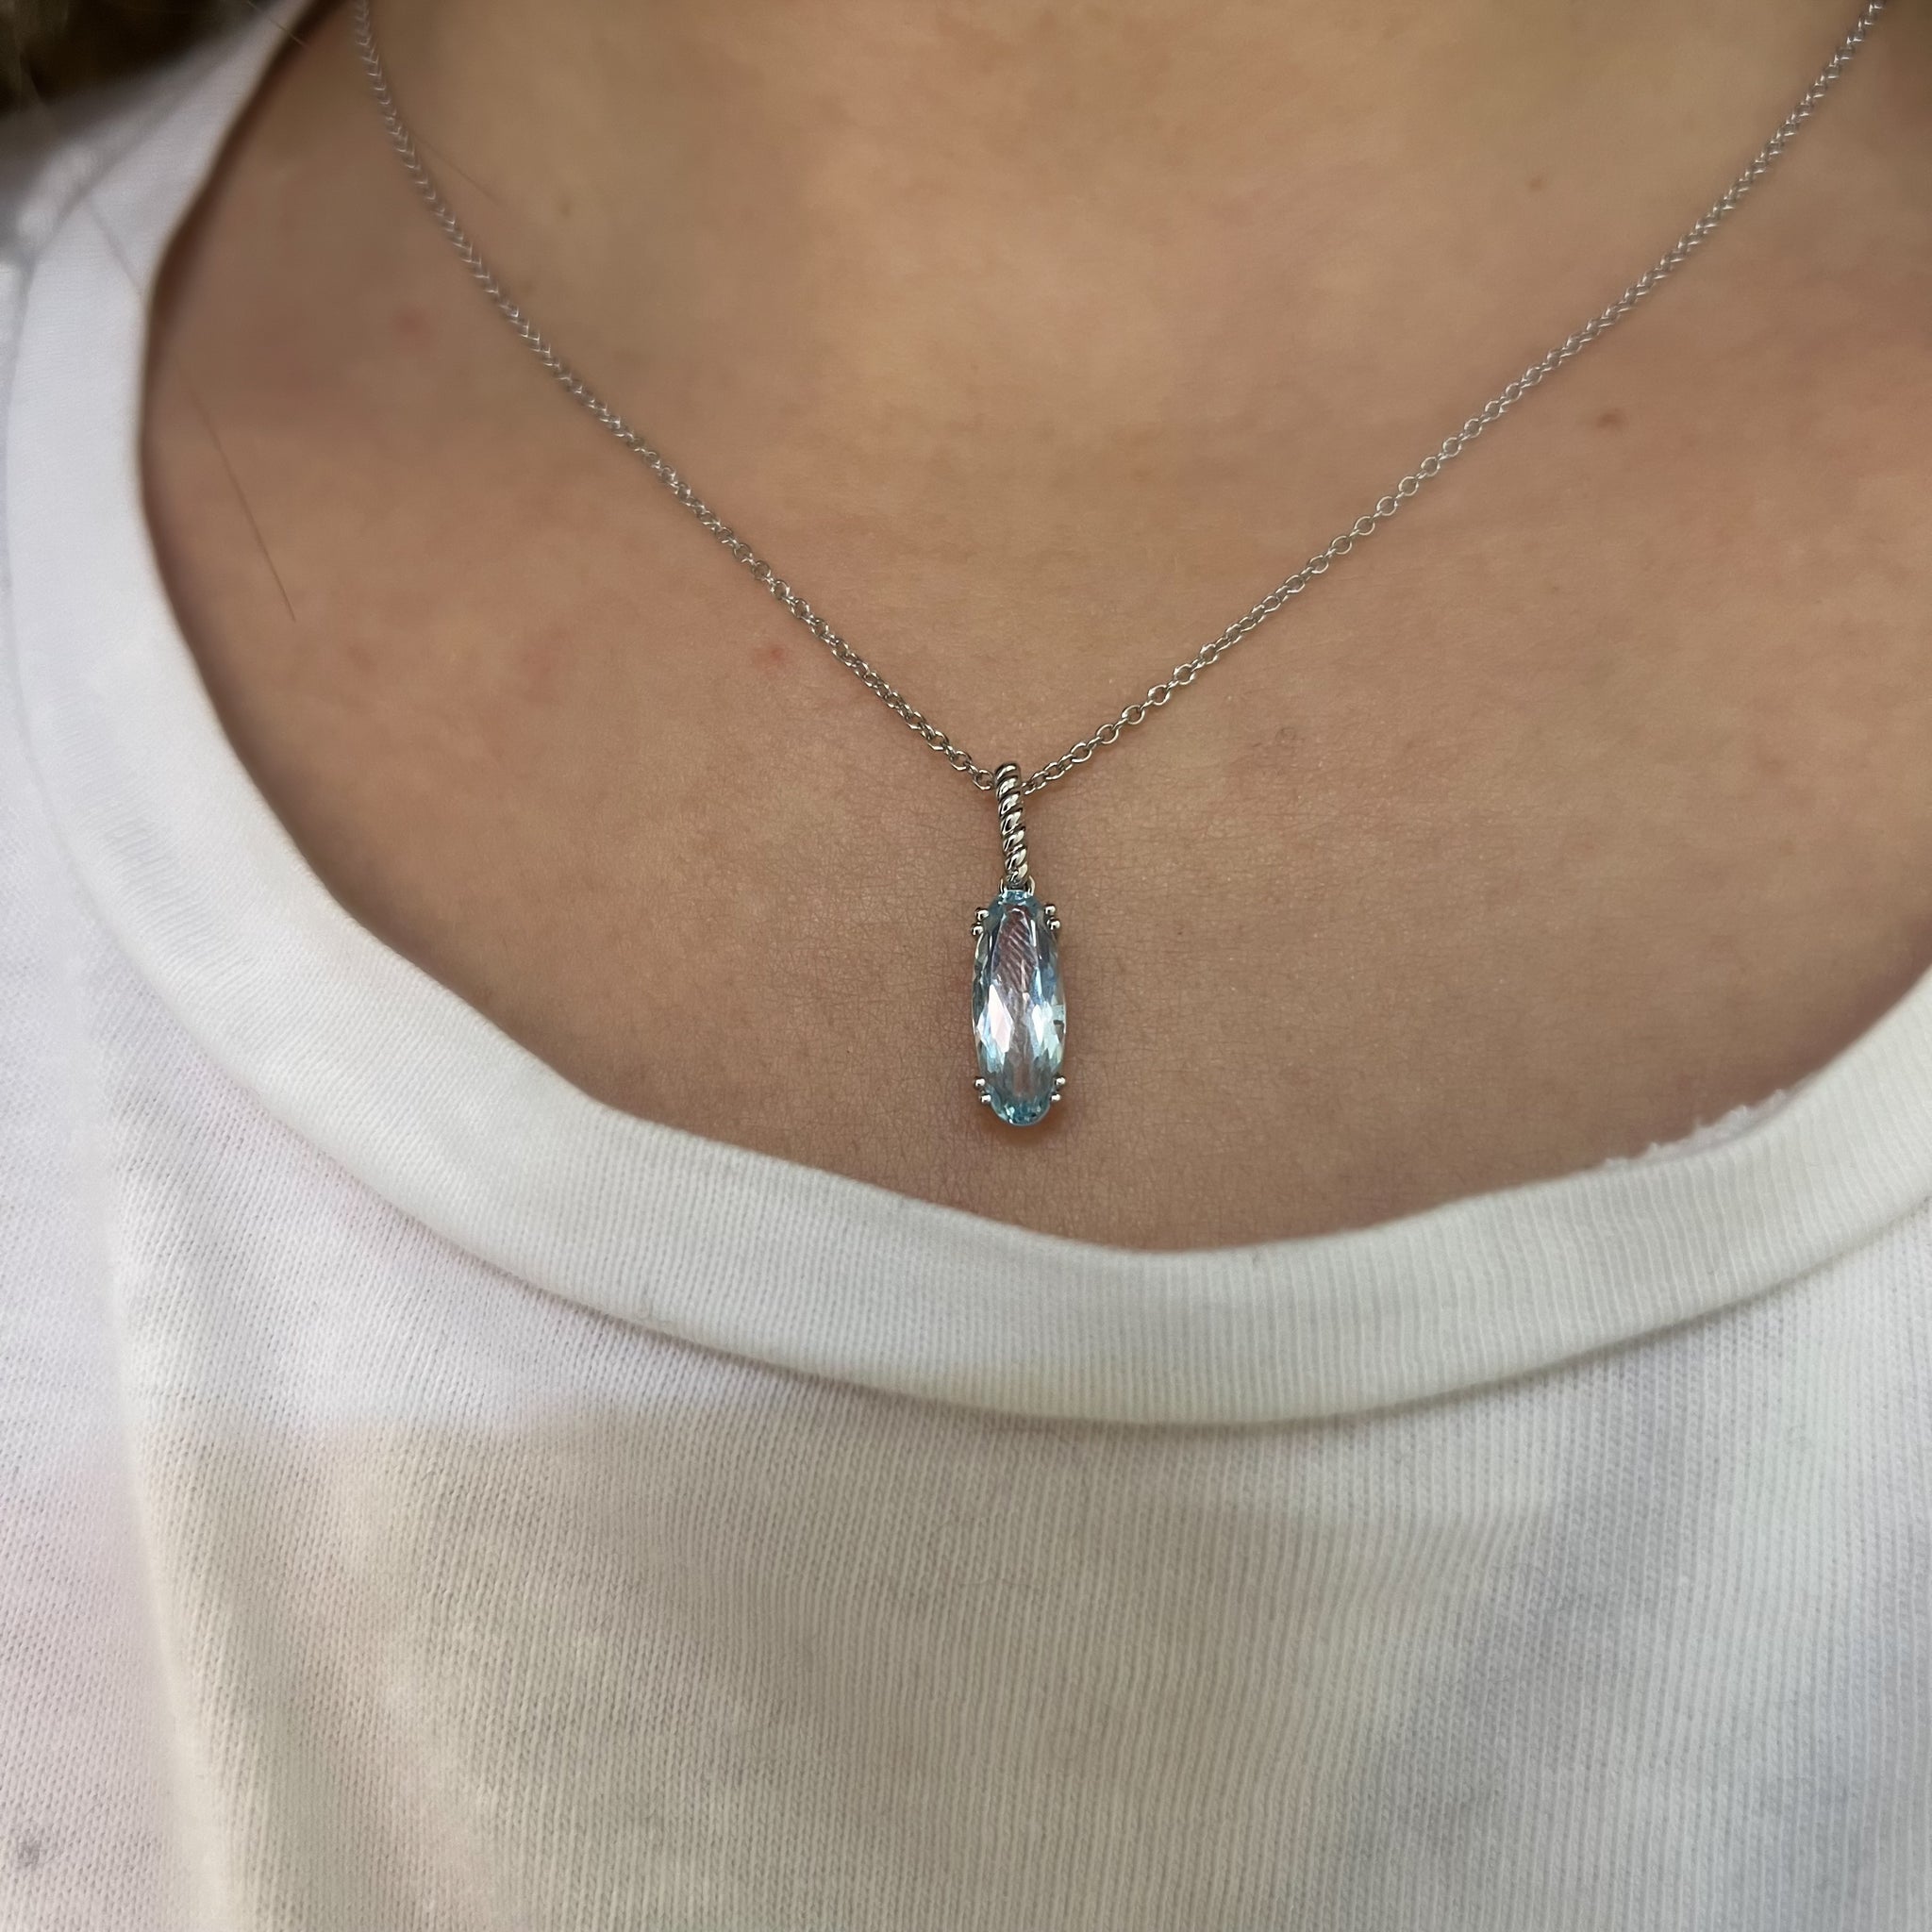 9ct White Gold 2.16ct Elongated Oval Blue Topaz Pendant